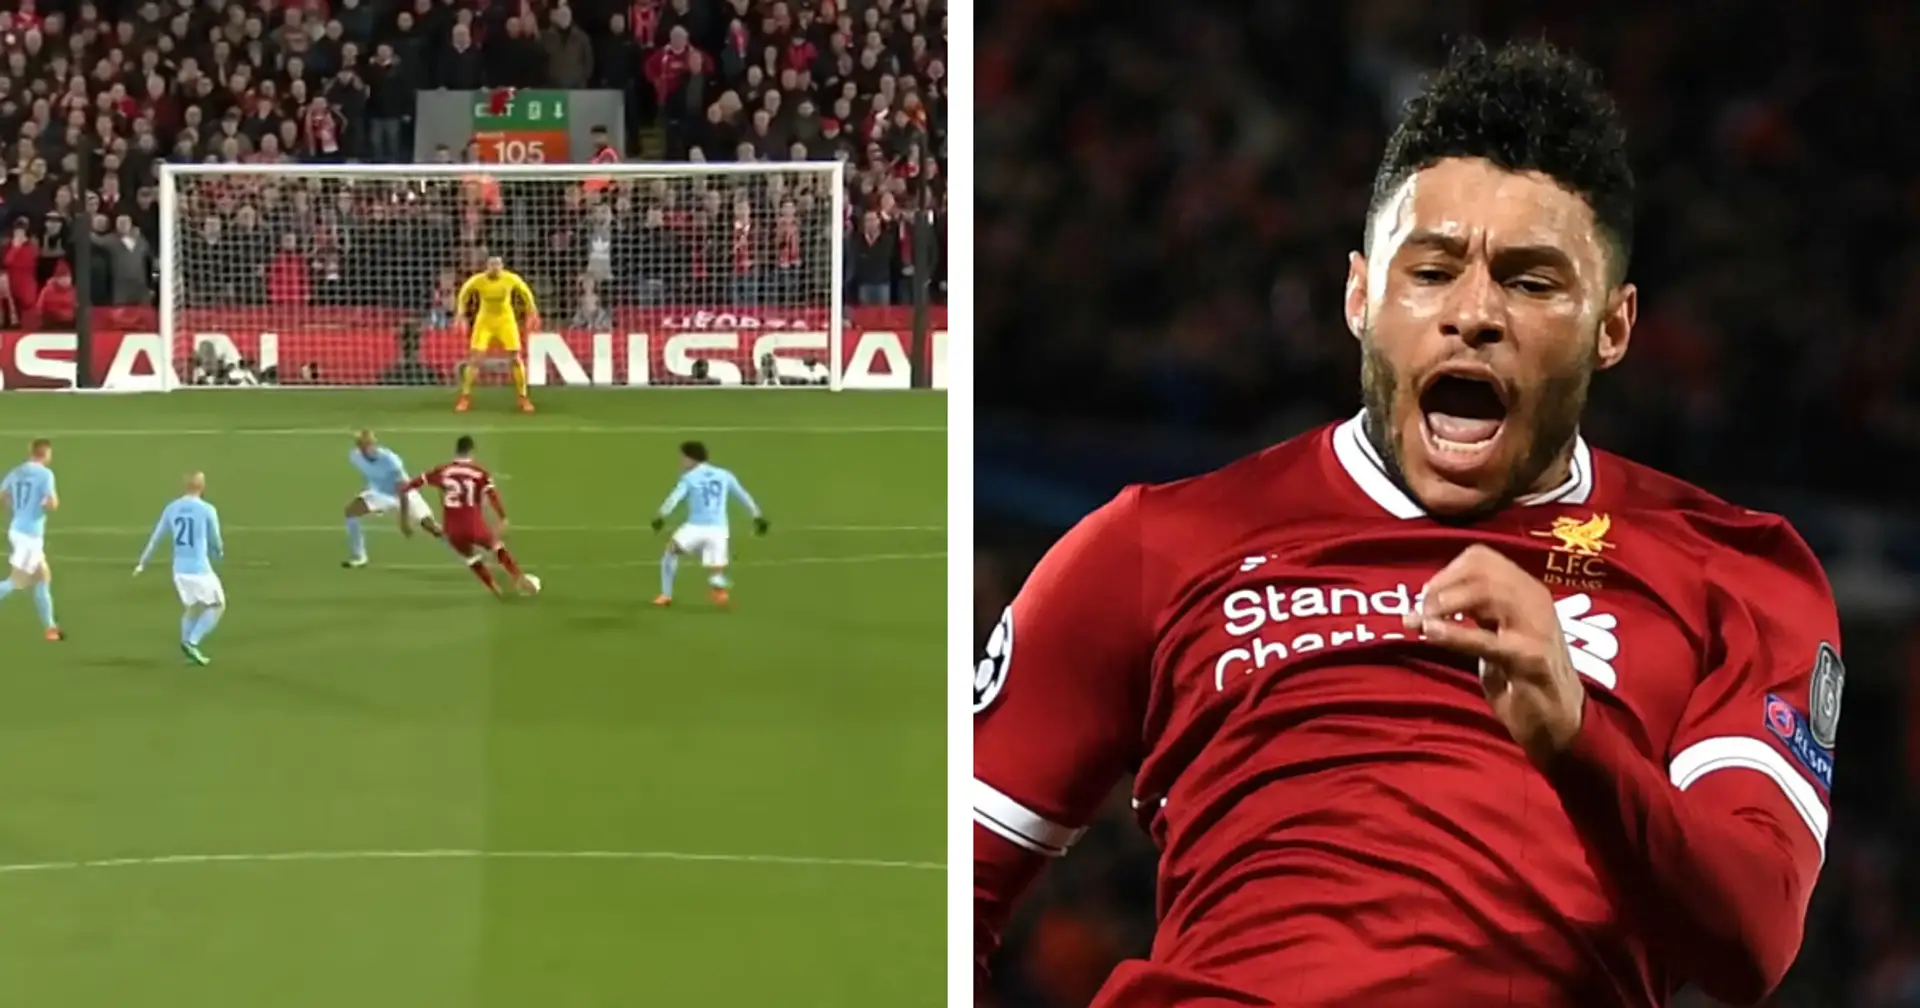 Relive every Alex Oxlade-Chamberlain goal for Liverpool - including those strikes vs Man City (video)